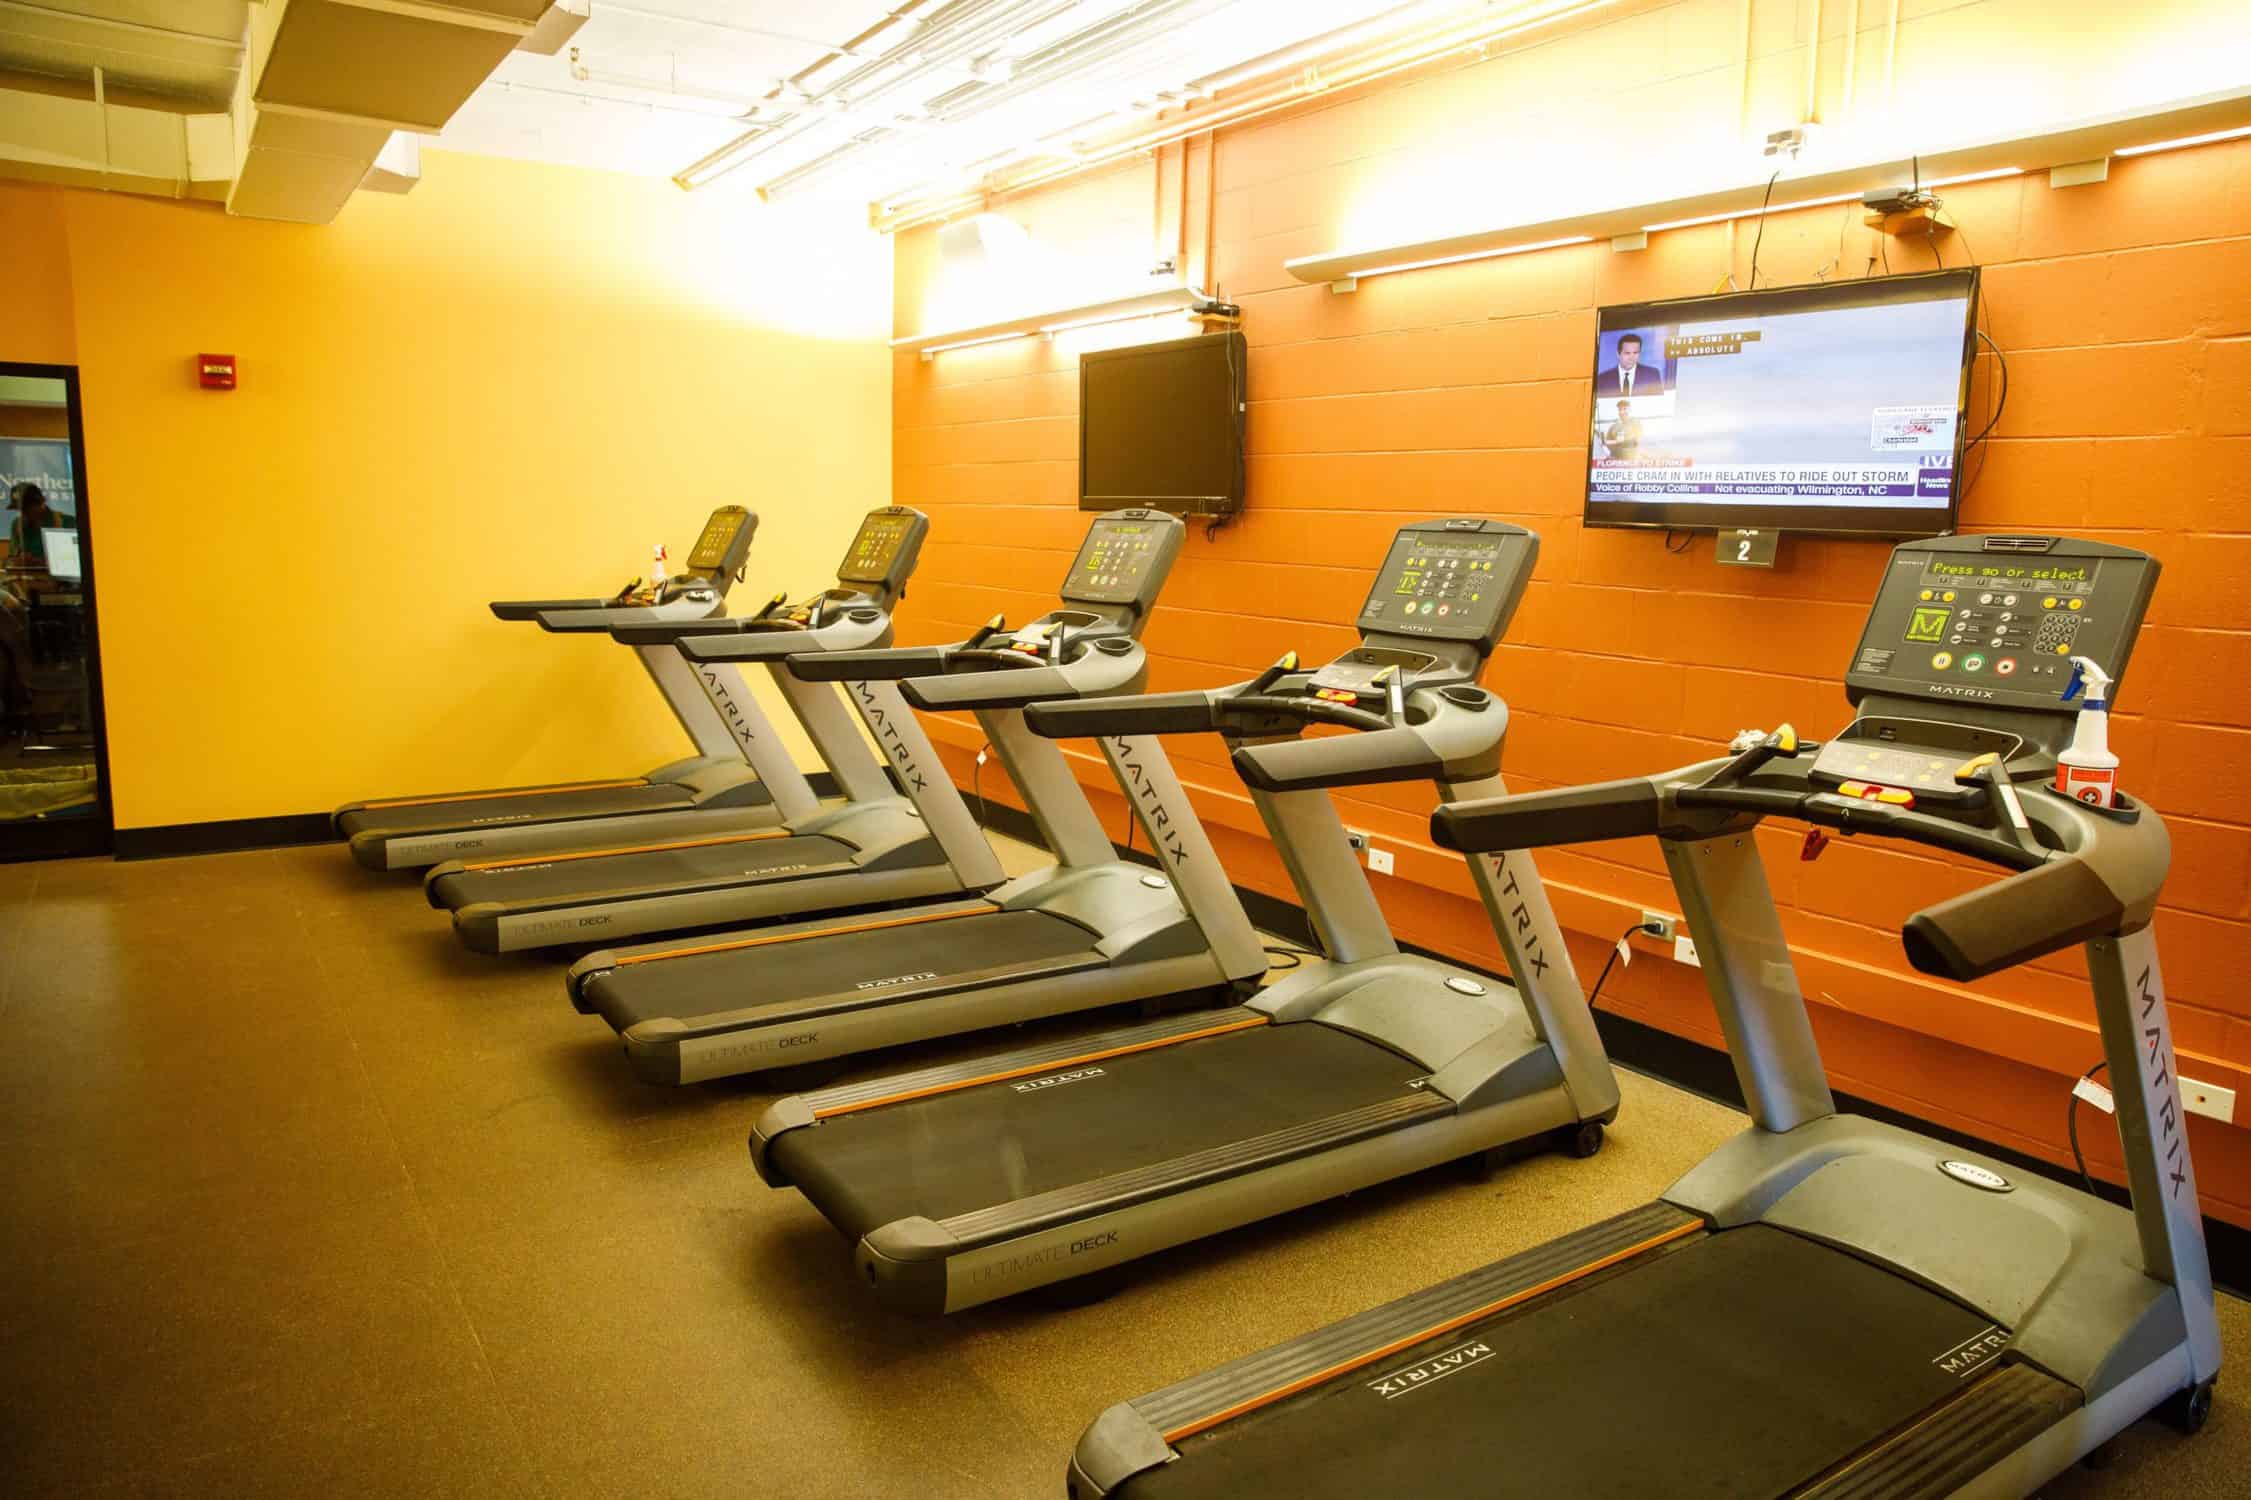 Line of treadmills in the fitness facility